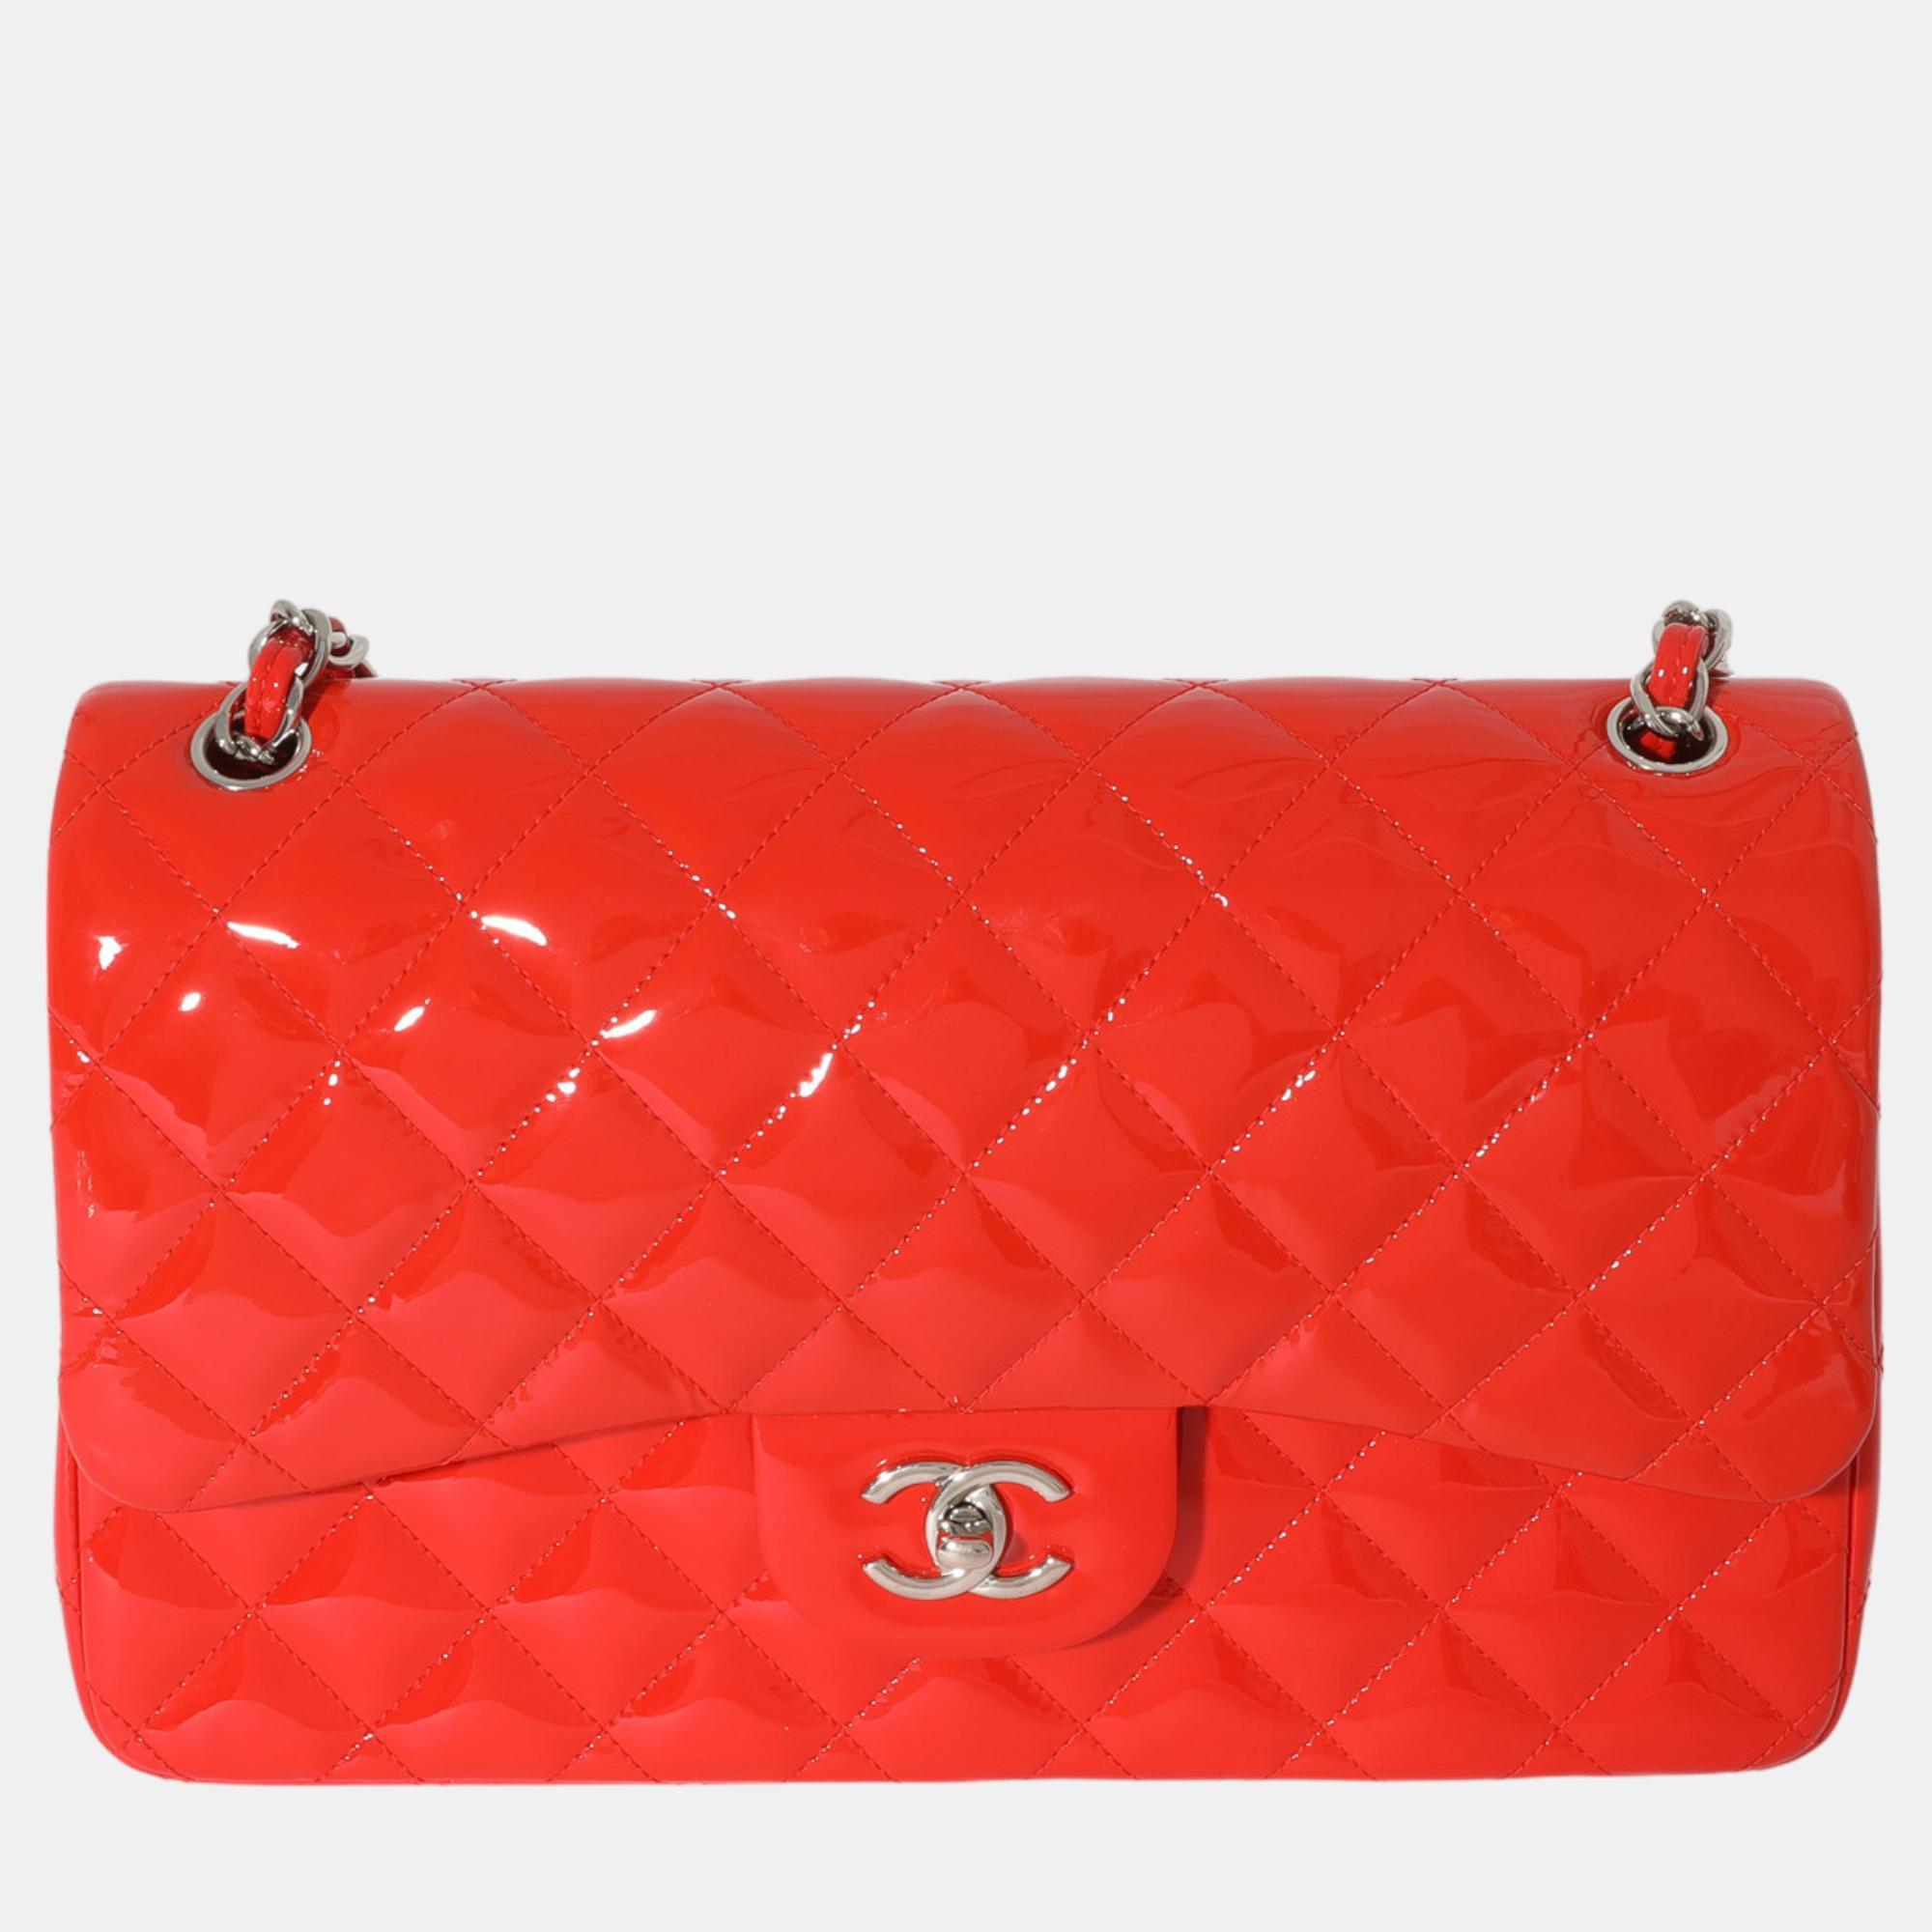 Chanel orange quilted patent leather jumbo double flap bag